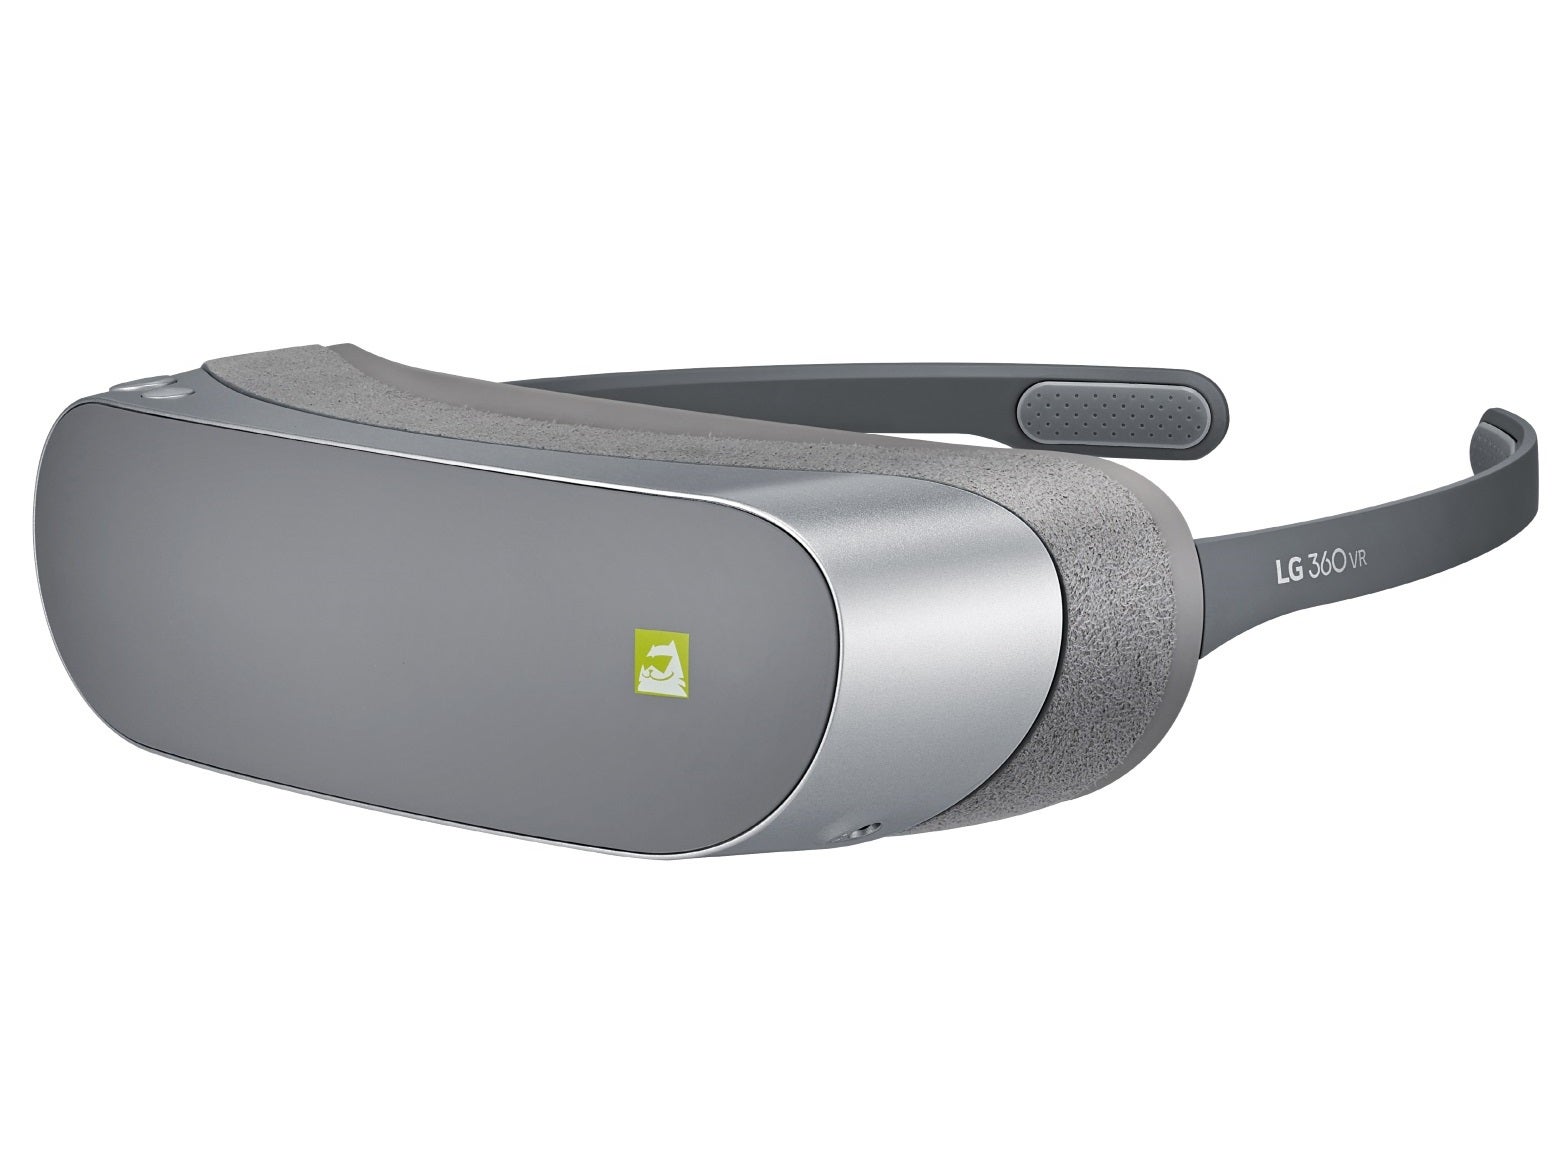 LG introduces own VR headset and 360-degree angle camera for next-gen immersive fun